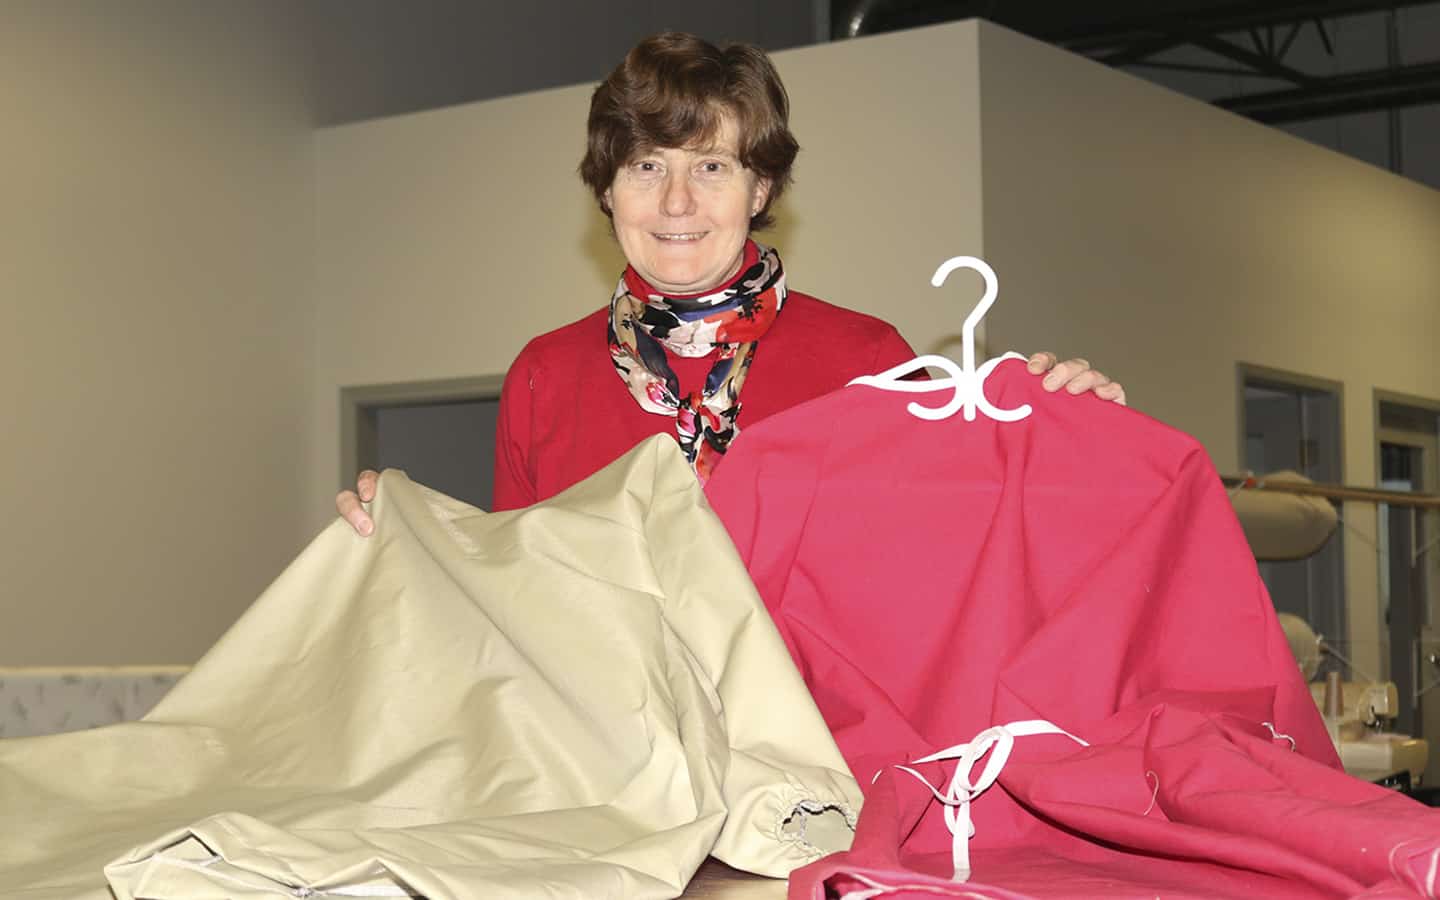 Local quilter shifting focus during COVID-19 pandemic